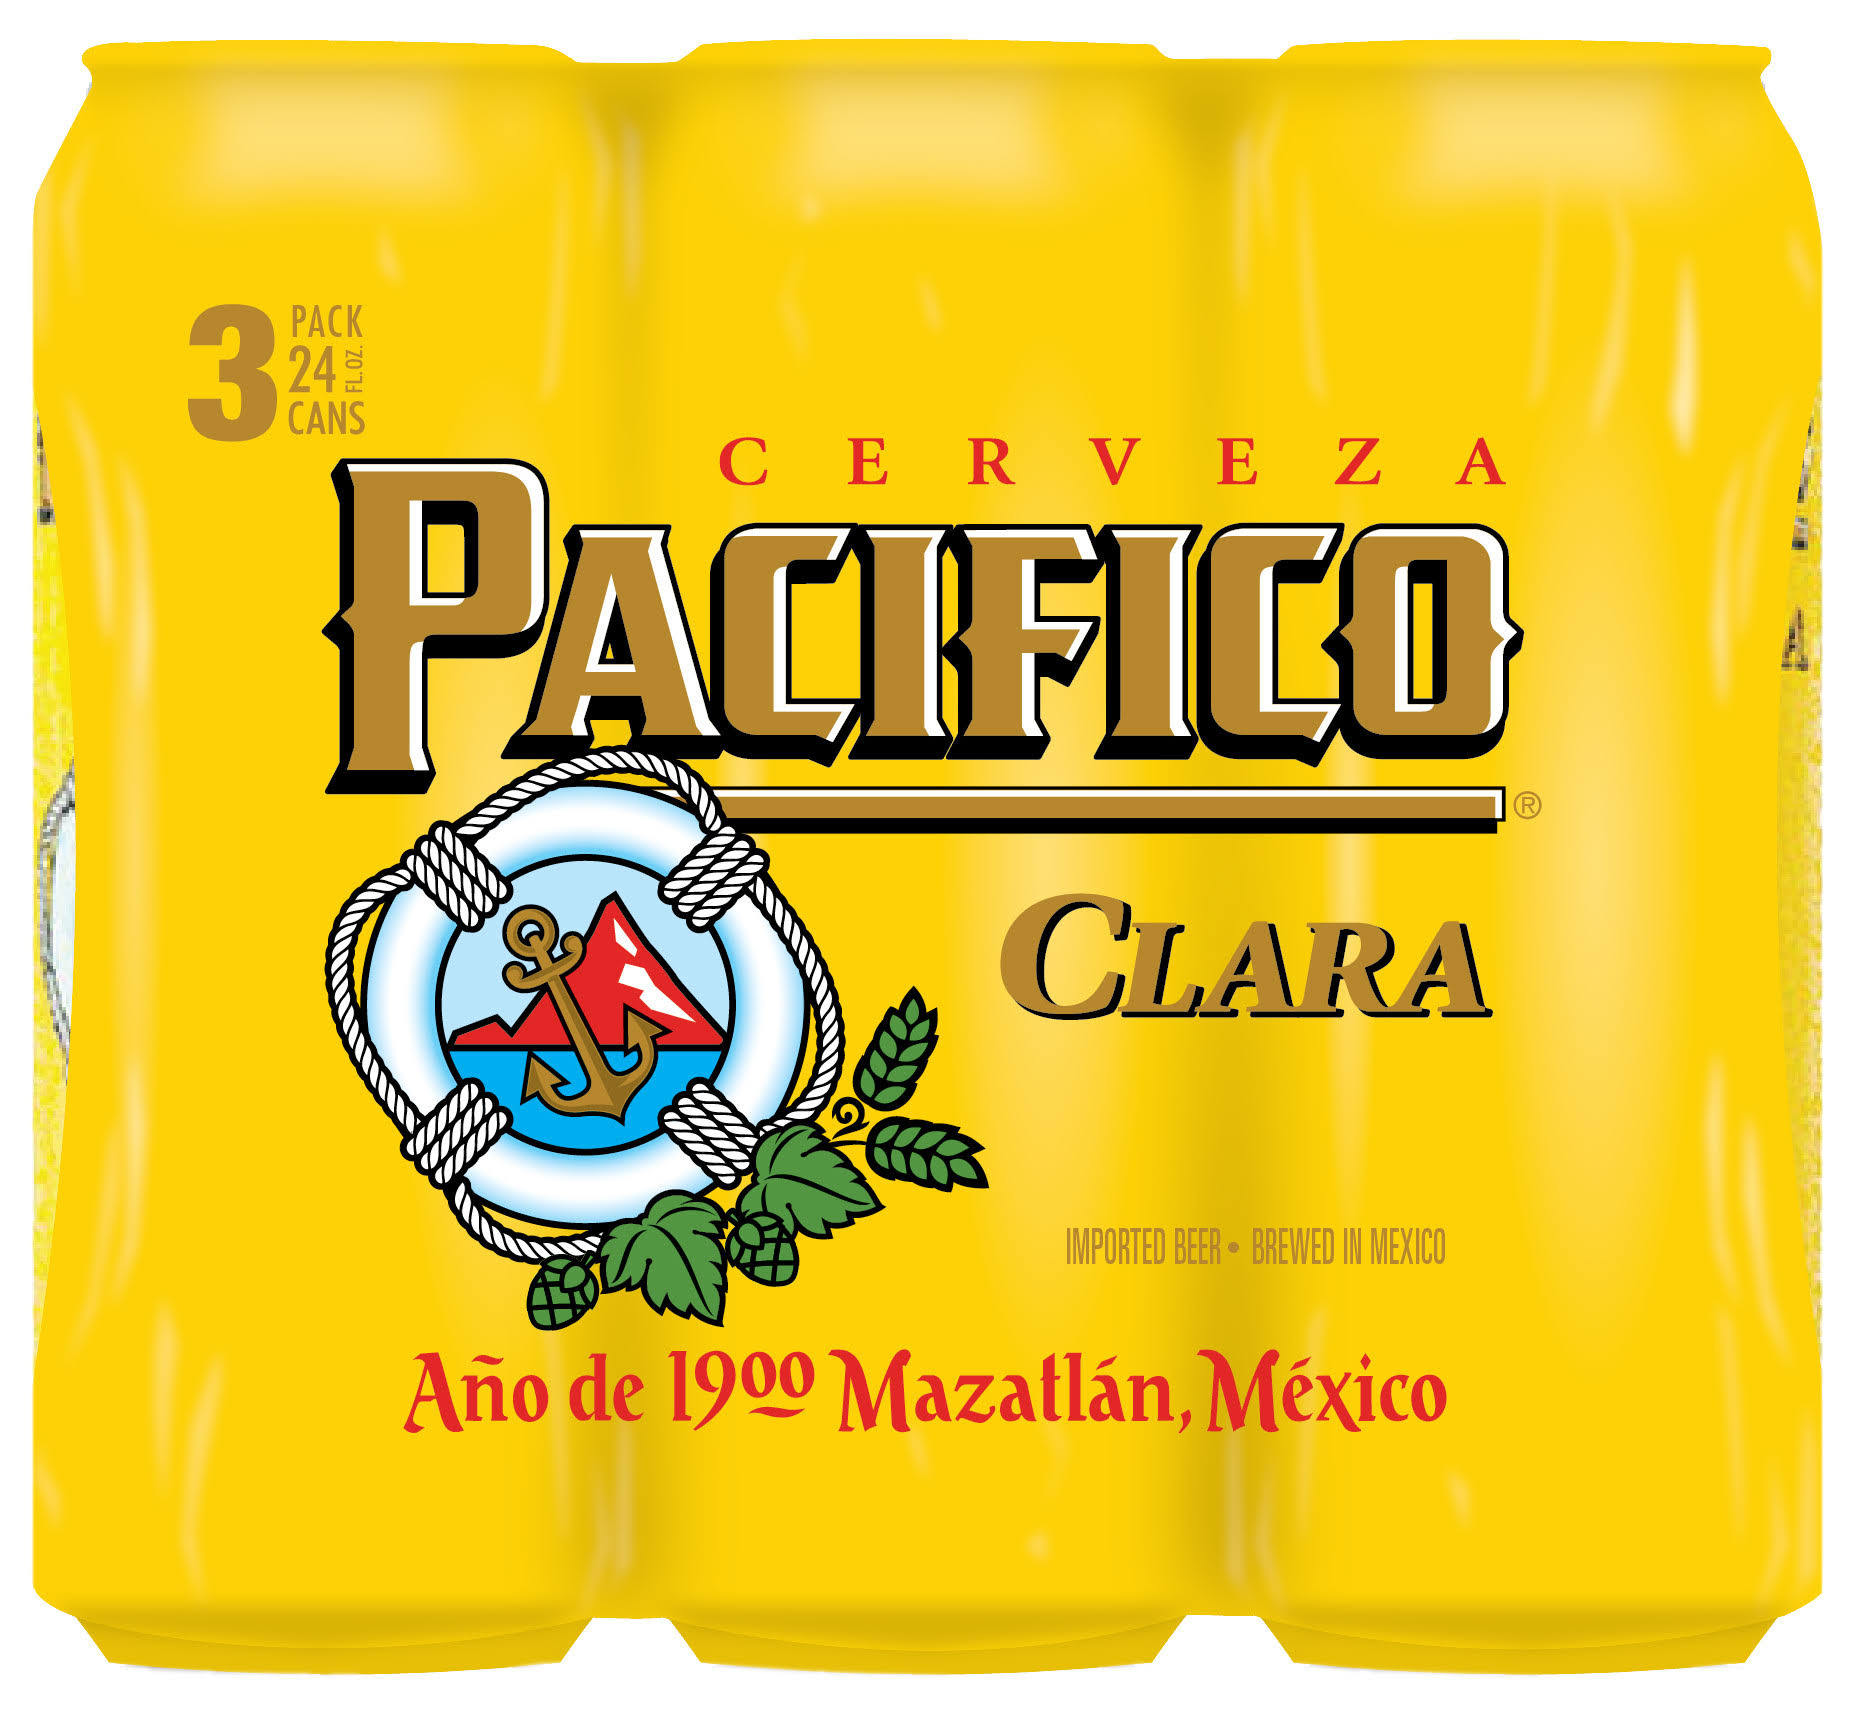 Pacifico Clara Lager Mexican Beer Cans - 24 fl oz